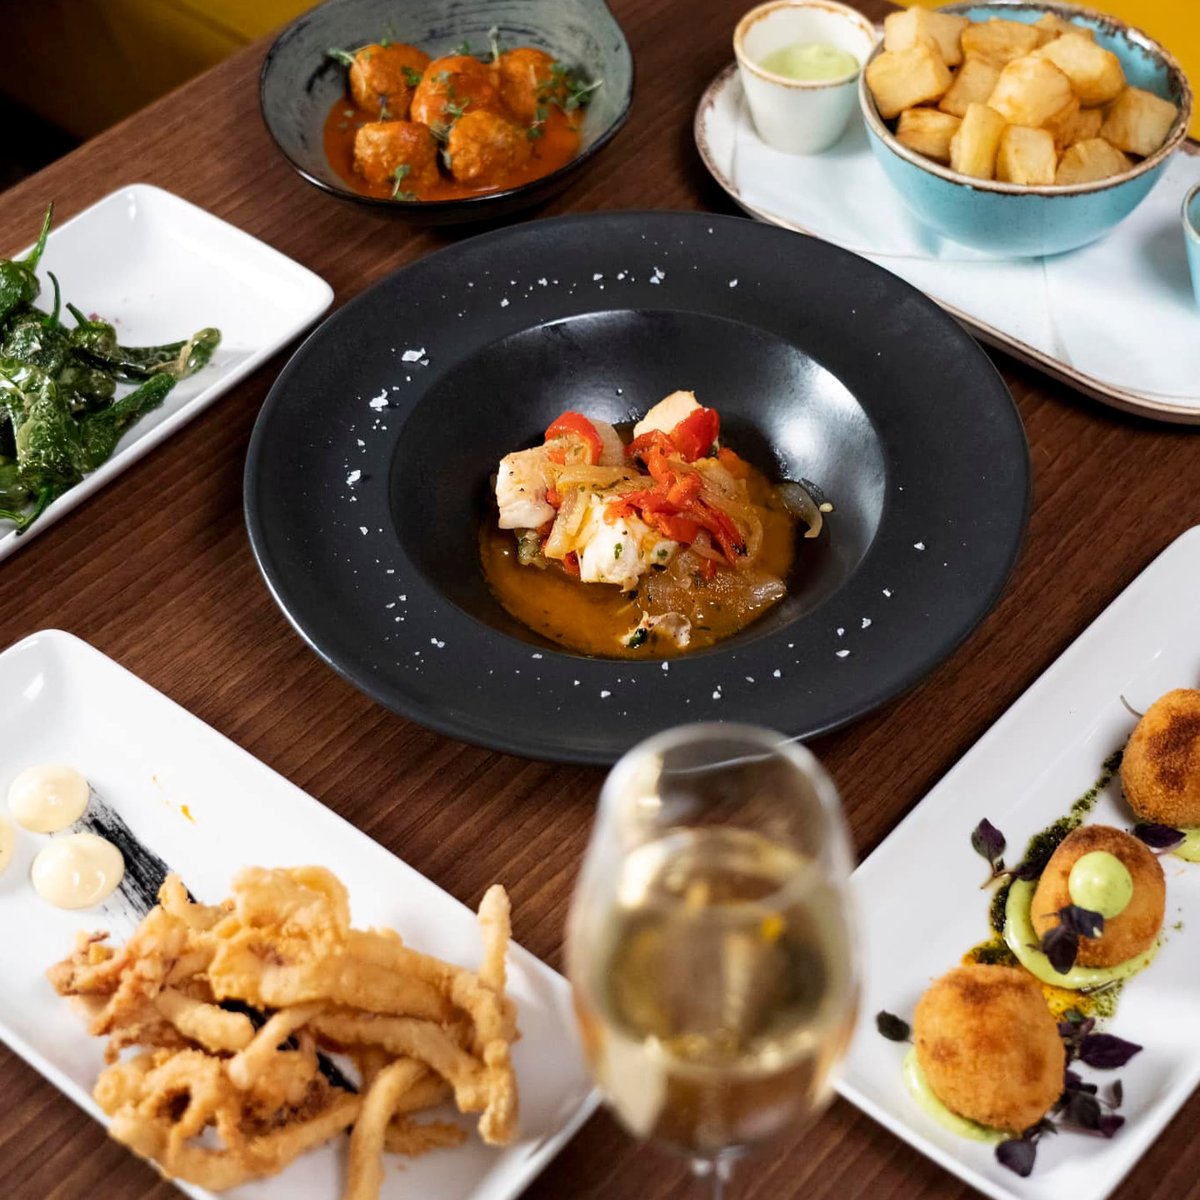 If, like us, you're growing sick and tired of this endless Manchester rain, then head down to @LaBanderaUK for a little bit of Canary Islands sunshine with 50% off their Tapas Menu in January. ~ For more info & to book, see ManchesterRestaurants.com ~